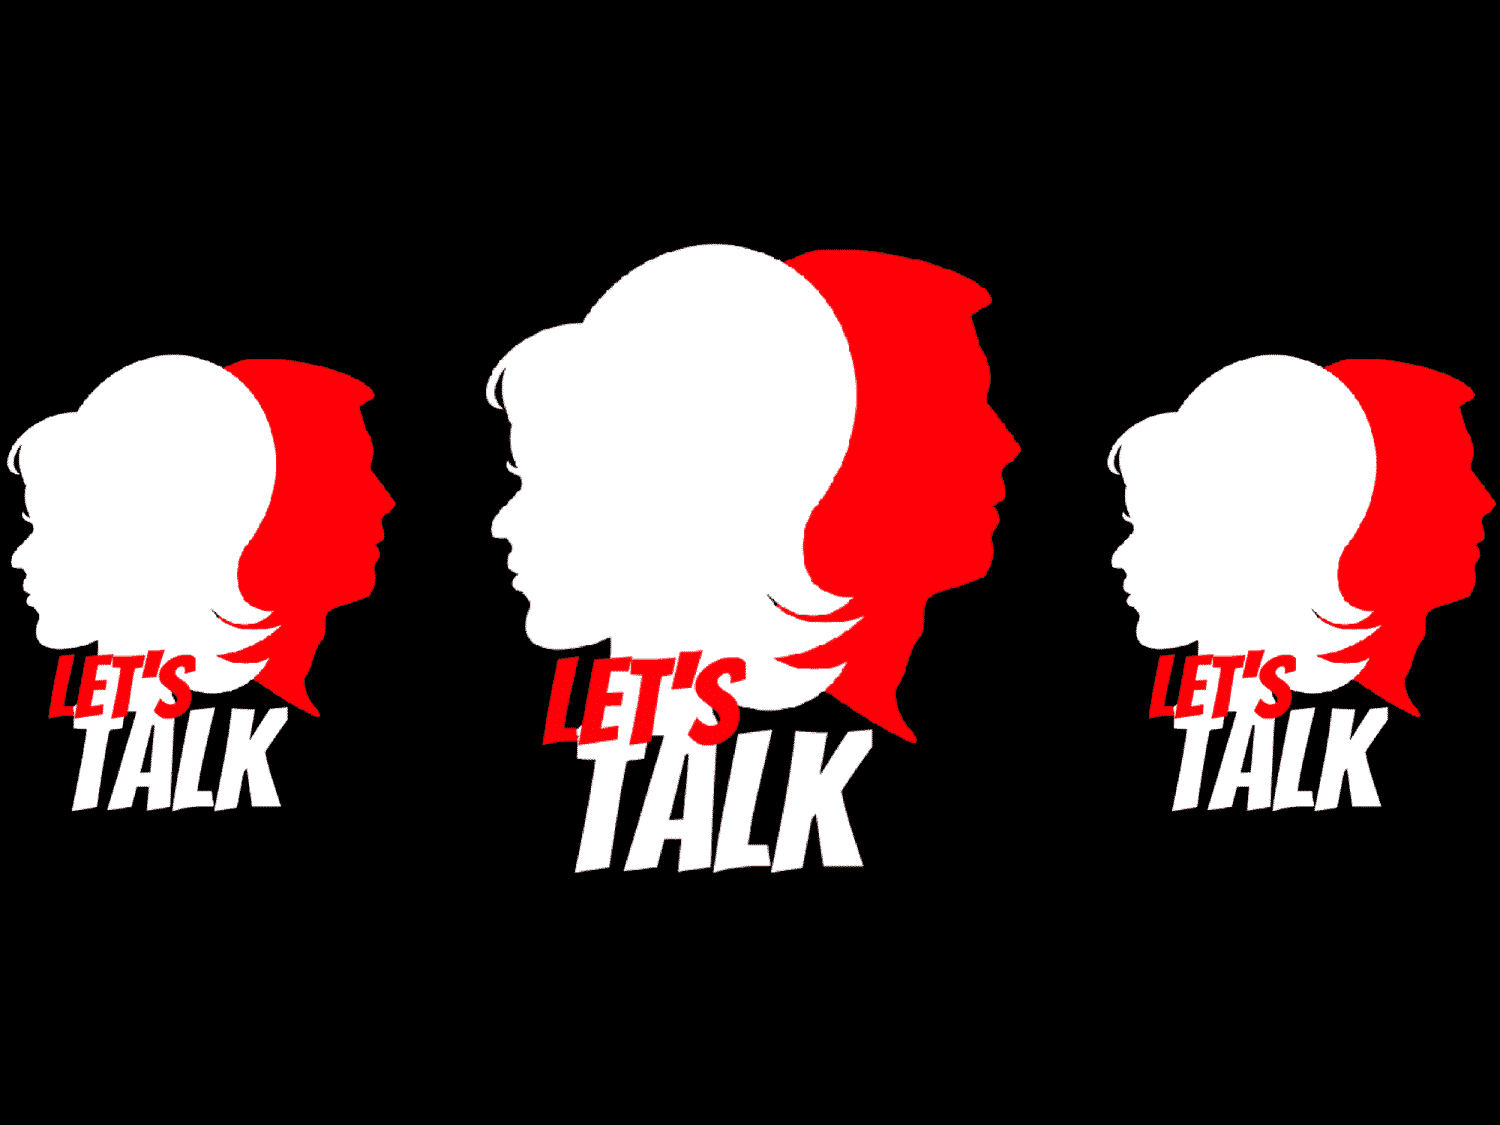 ‘Let’s Talk’ announced as official video title for mental health workshops